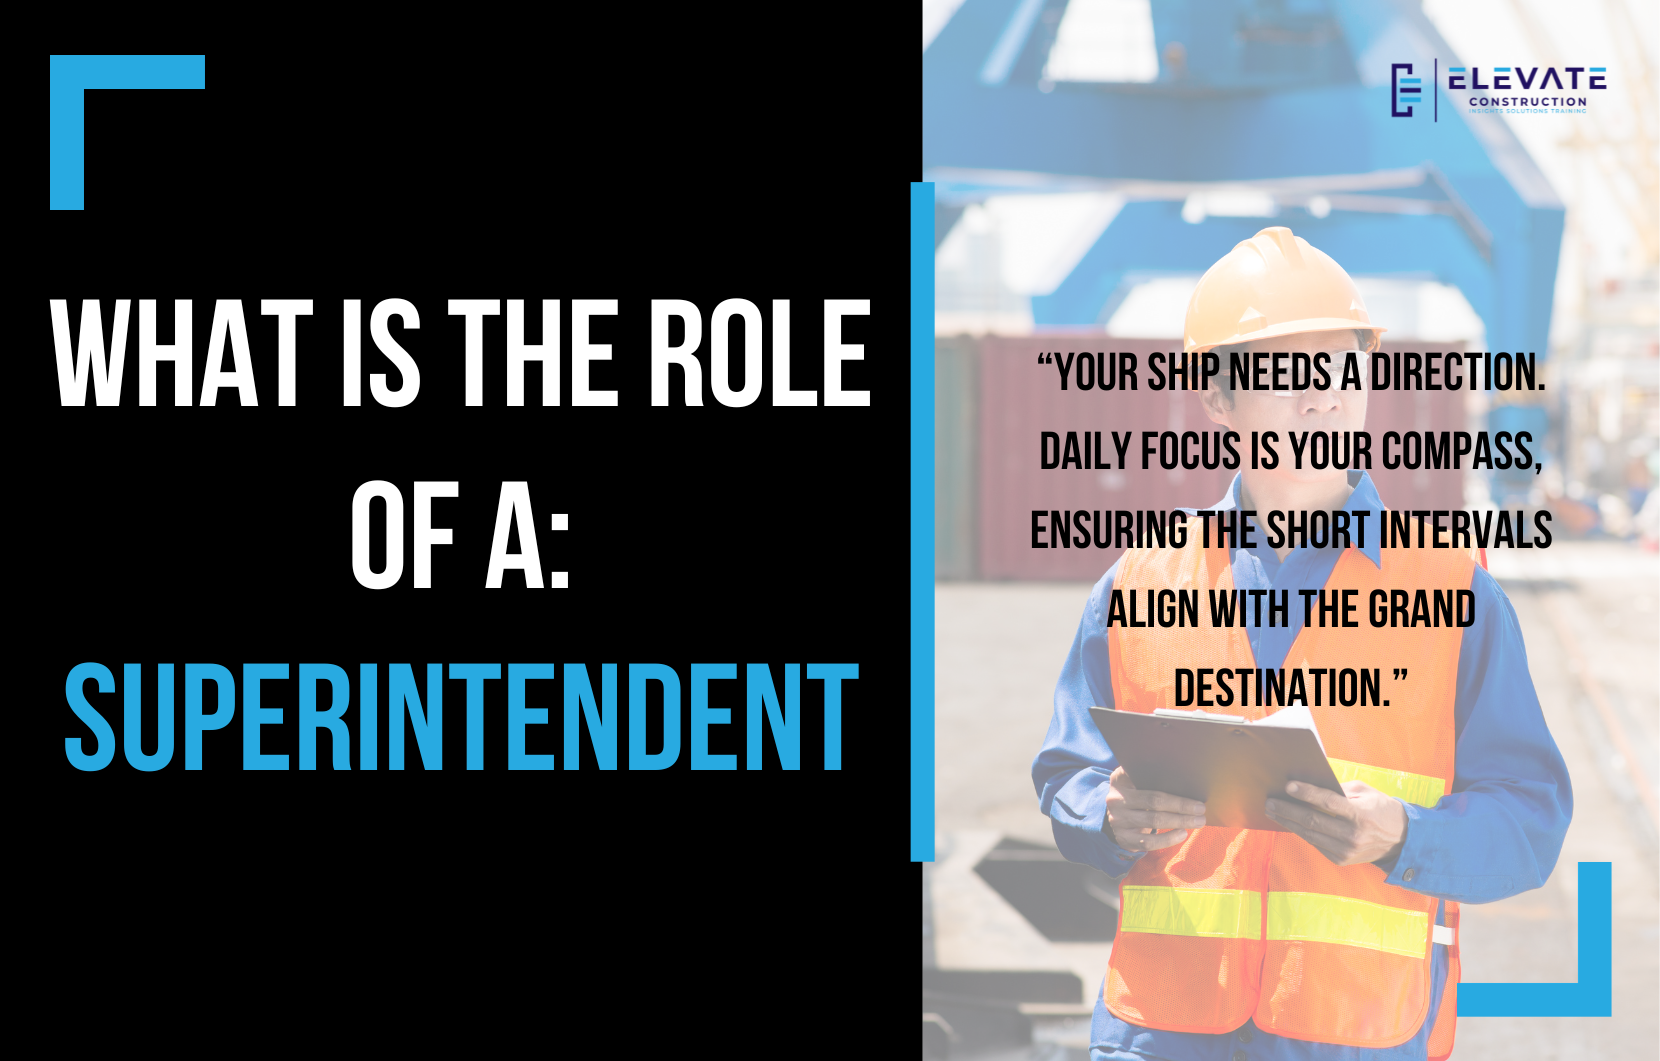 What Is The Role of A Superintendent In Construction?